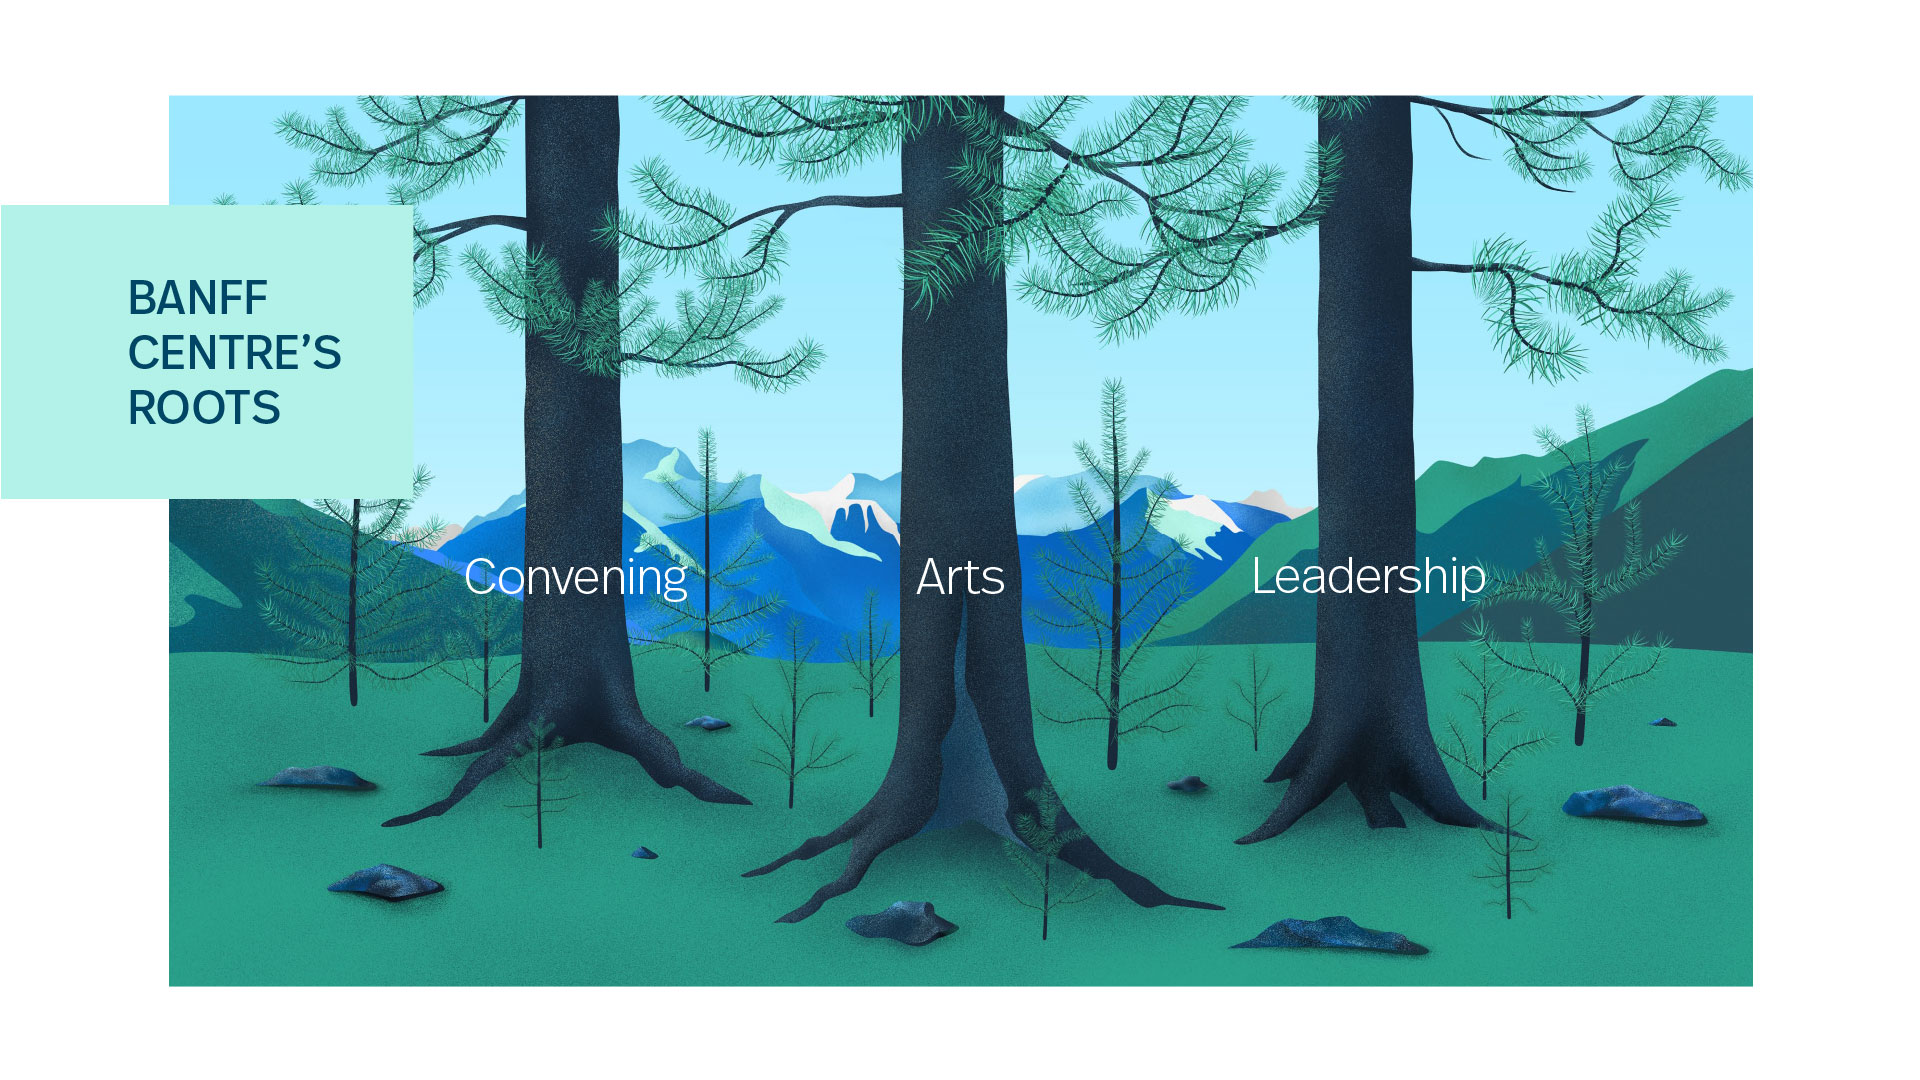 Banff Centre's Roots: Convening, Arts and Leadership.